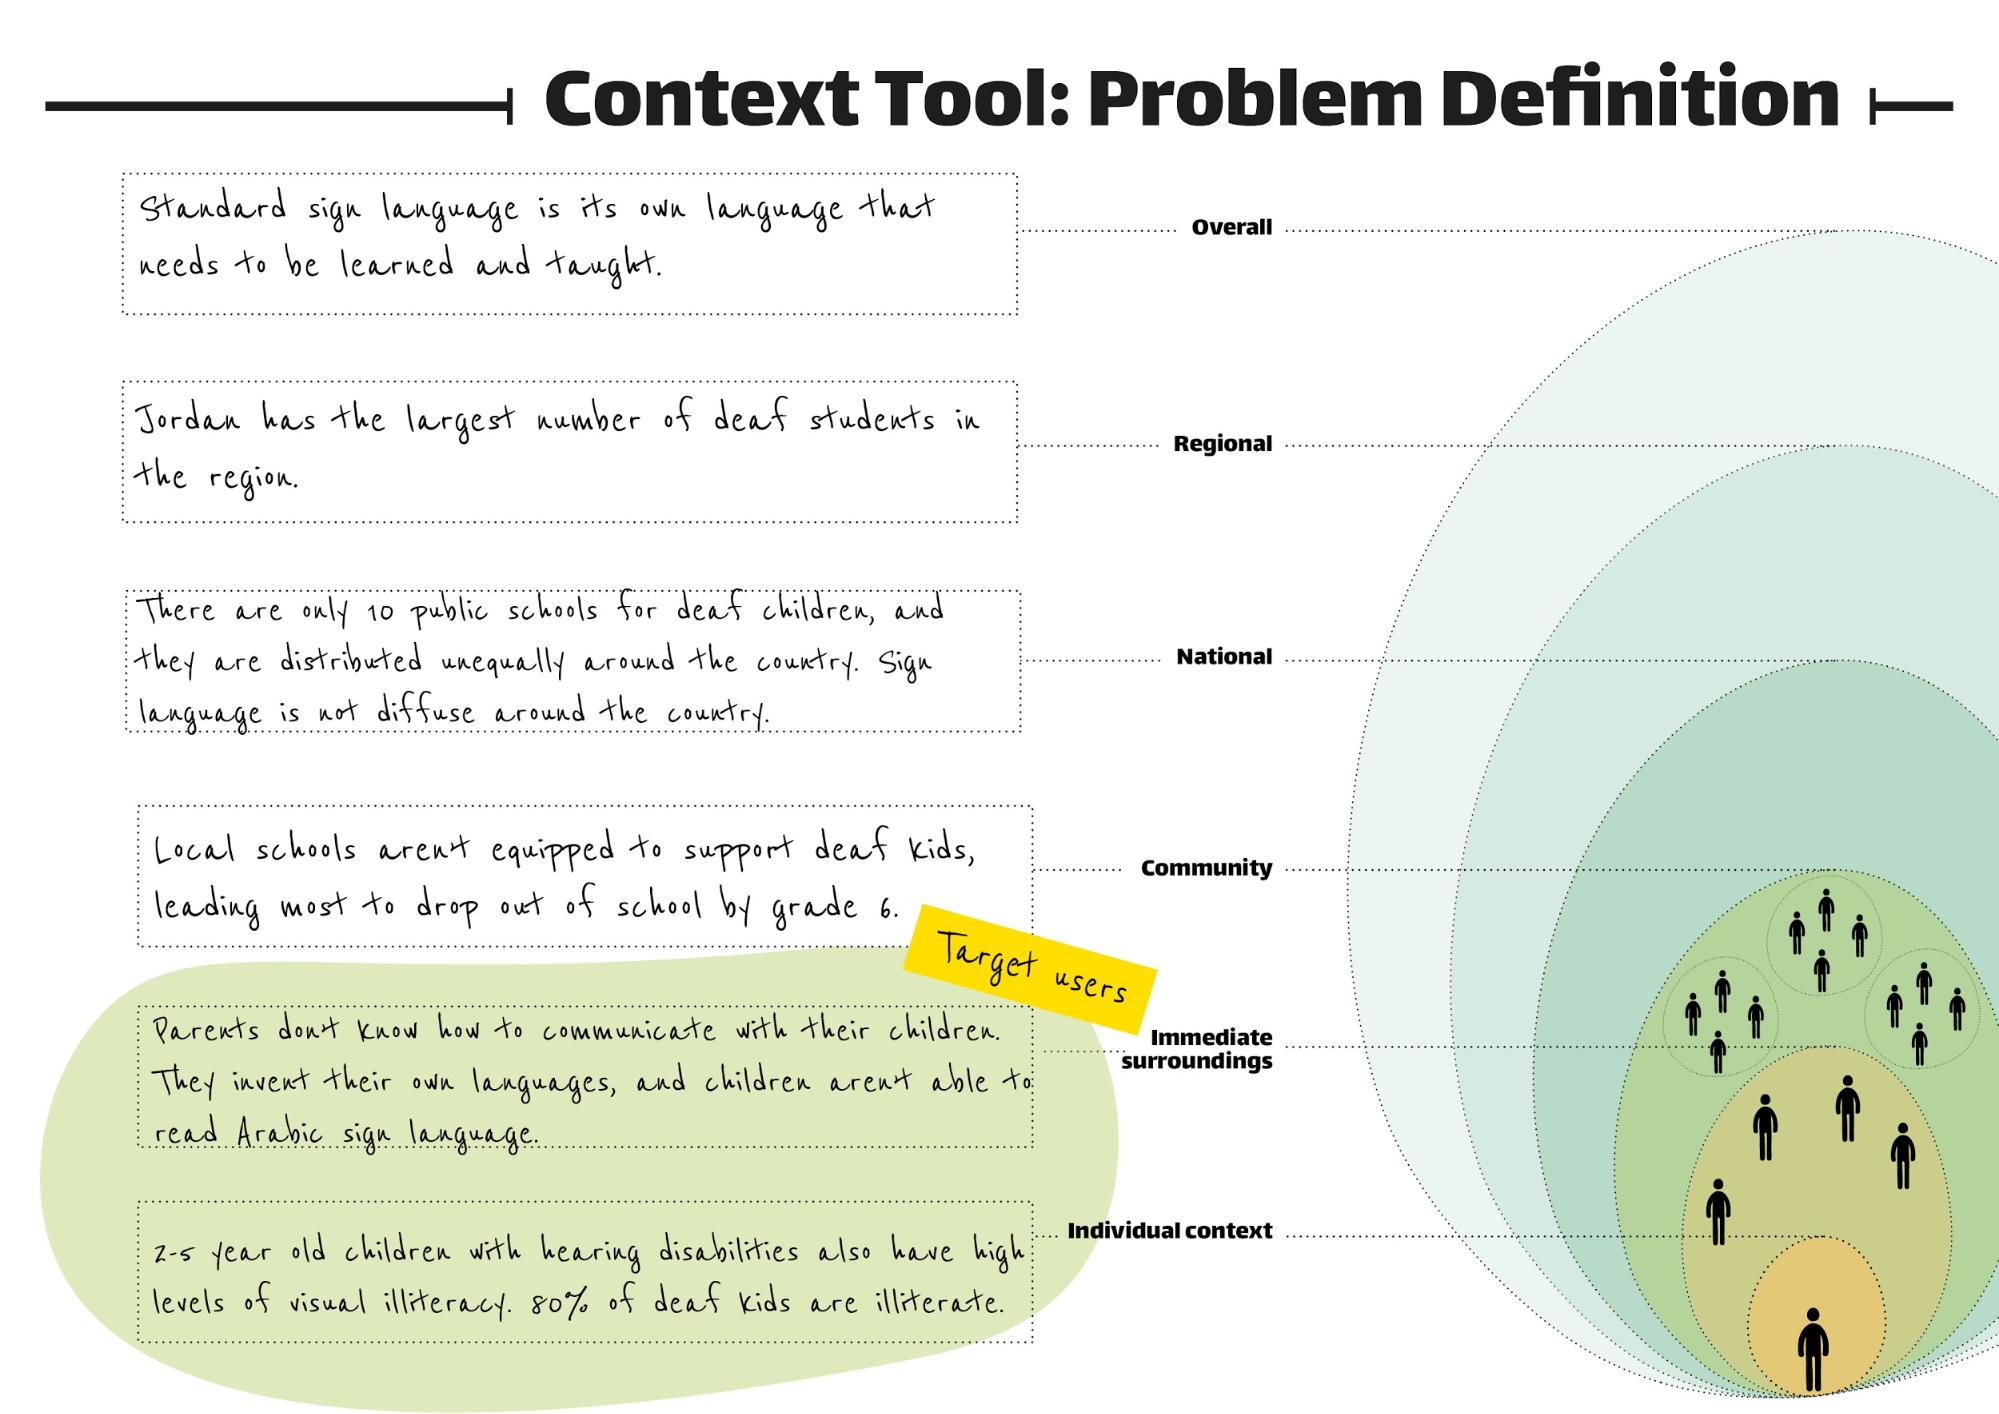 Context Tool: Problem Definition image